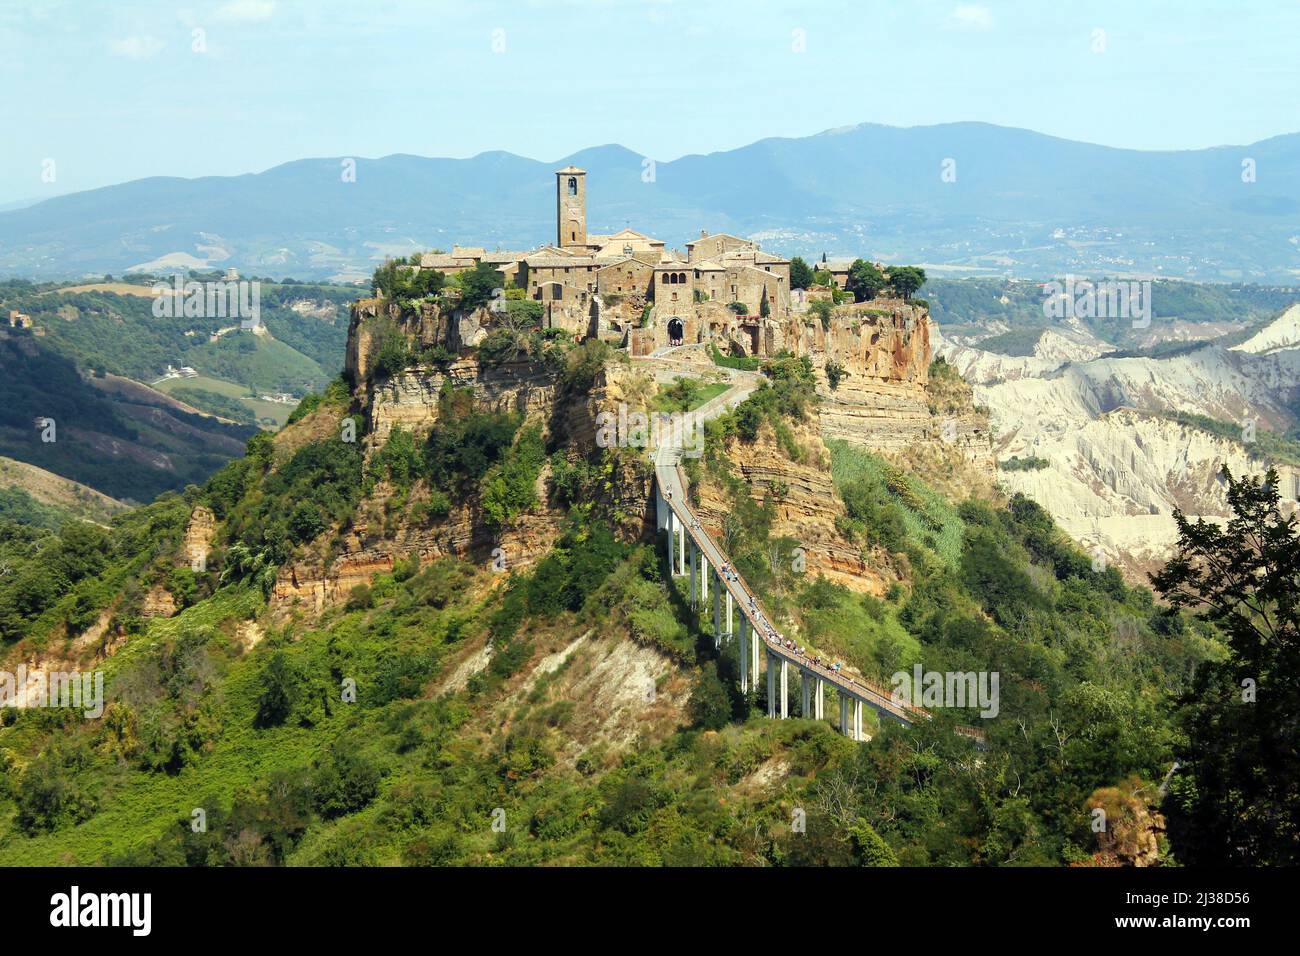 Close up of the historical civita village of Bagnoregio standing on a cliff with the long pedestrian bridge in the center of Italy Stock Photo